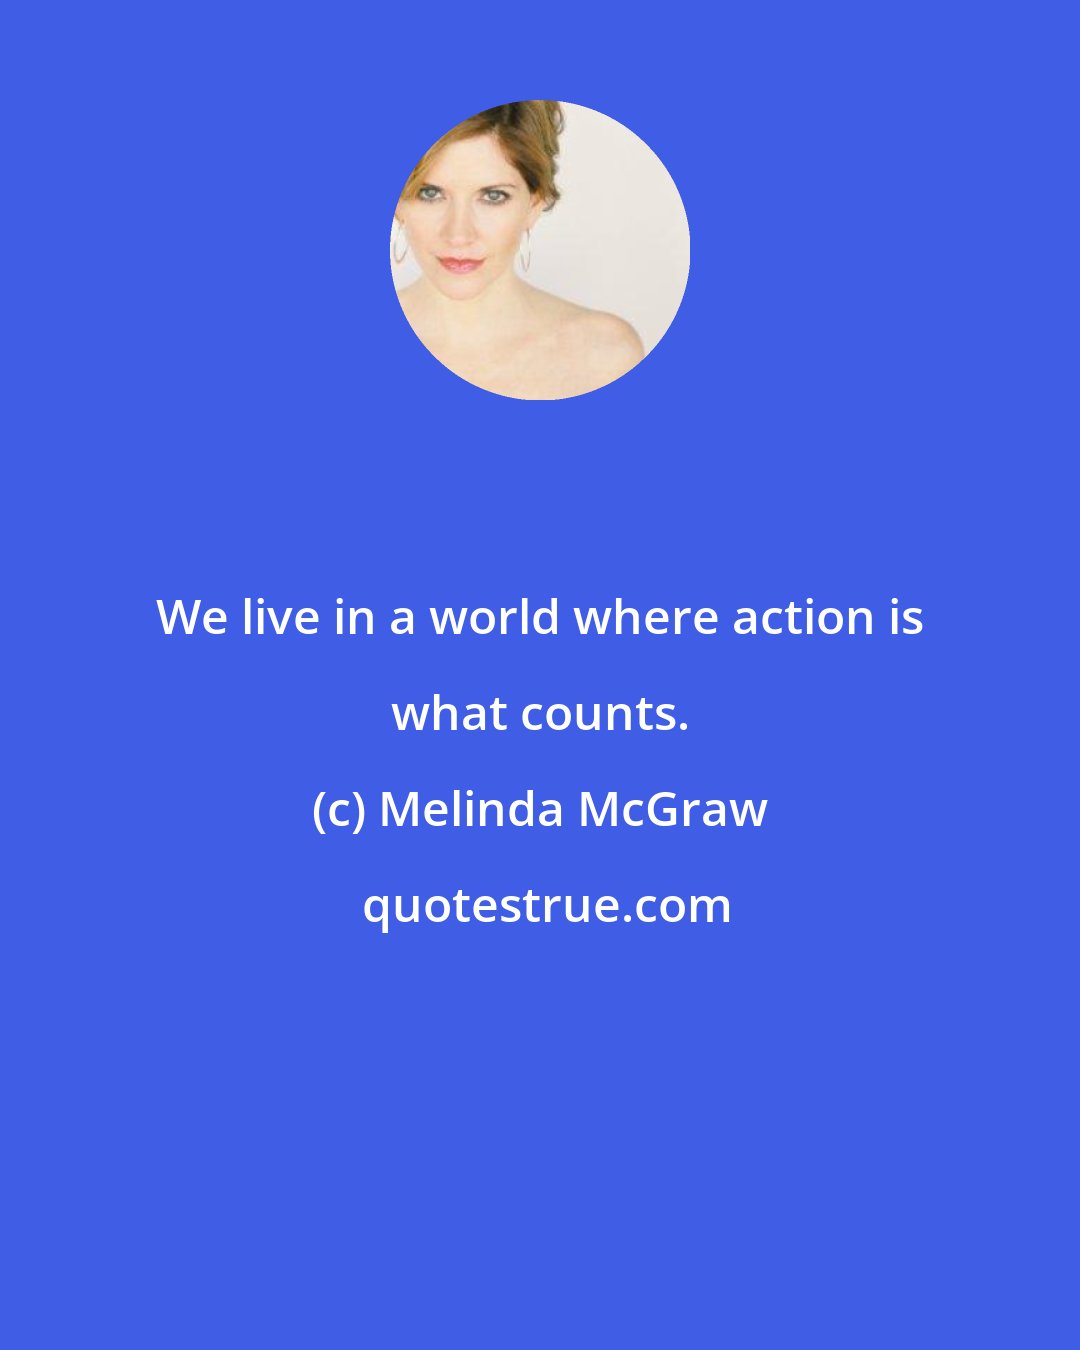 Melinda McGraw: We live in a world where action is what counts.